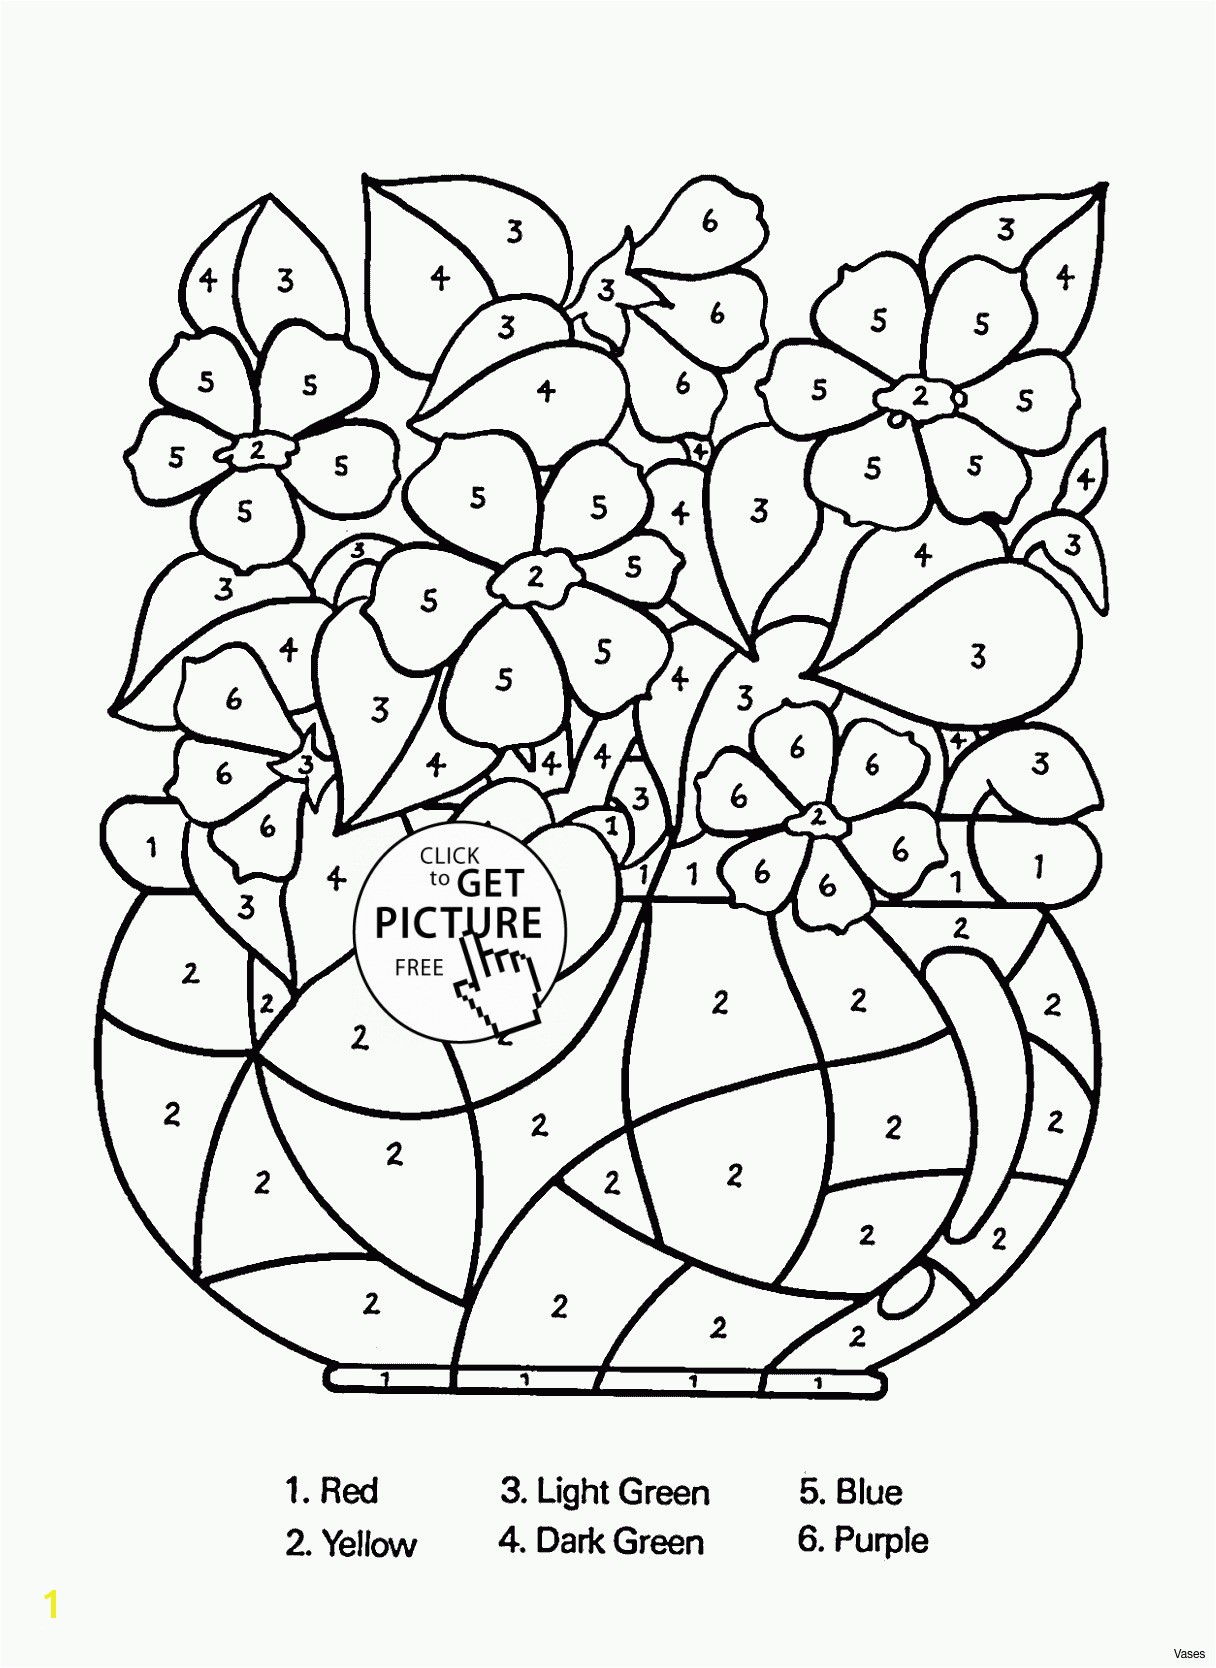 Dr who Coloring Pages Best Pokemon Coloring Pages Coloring Pages